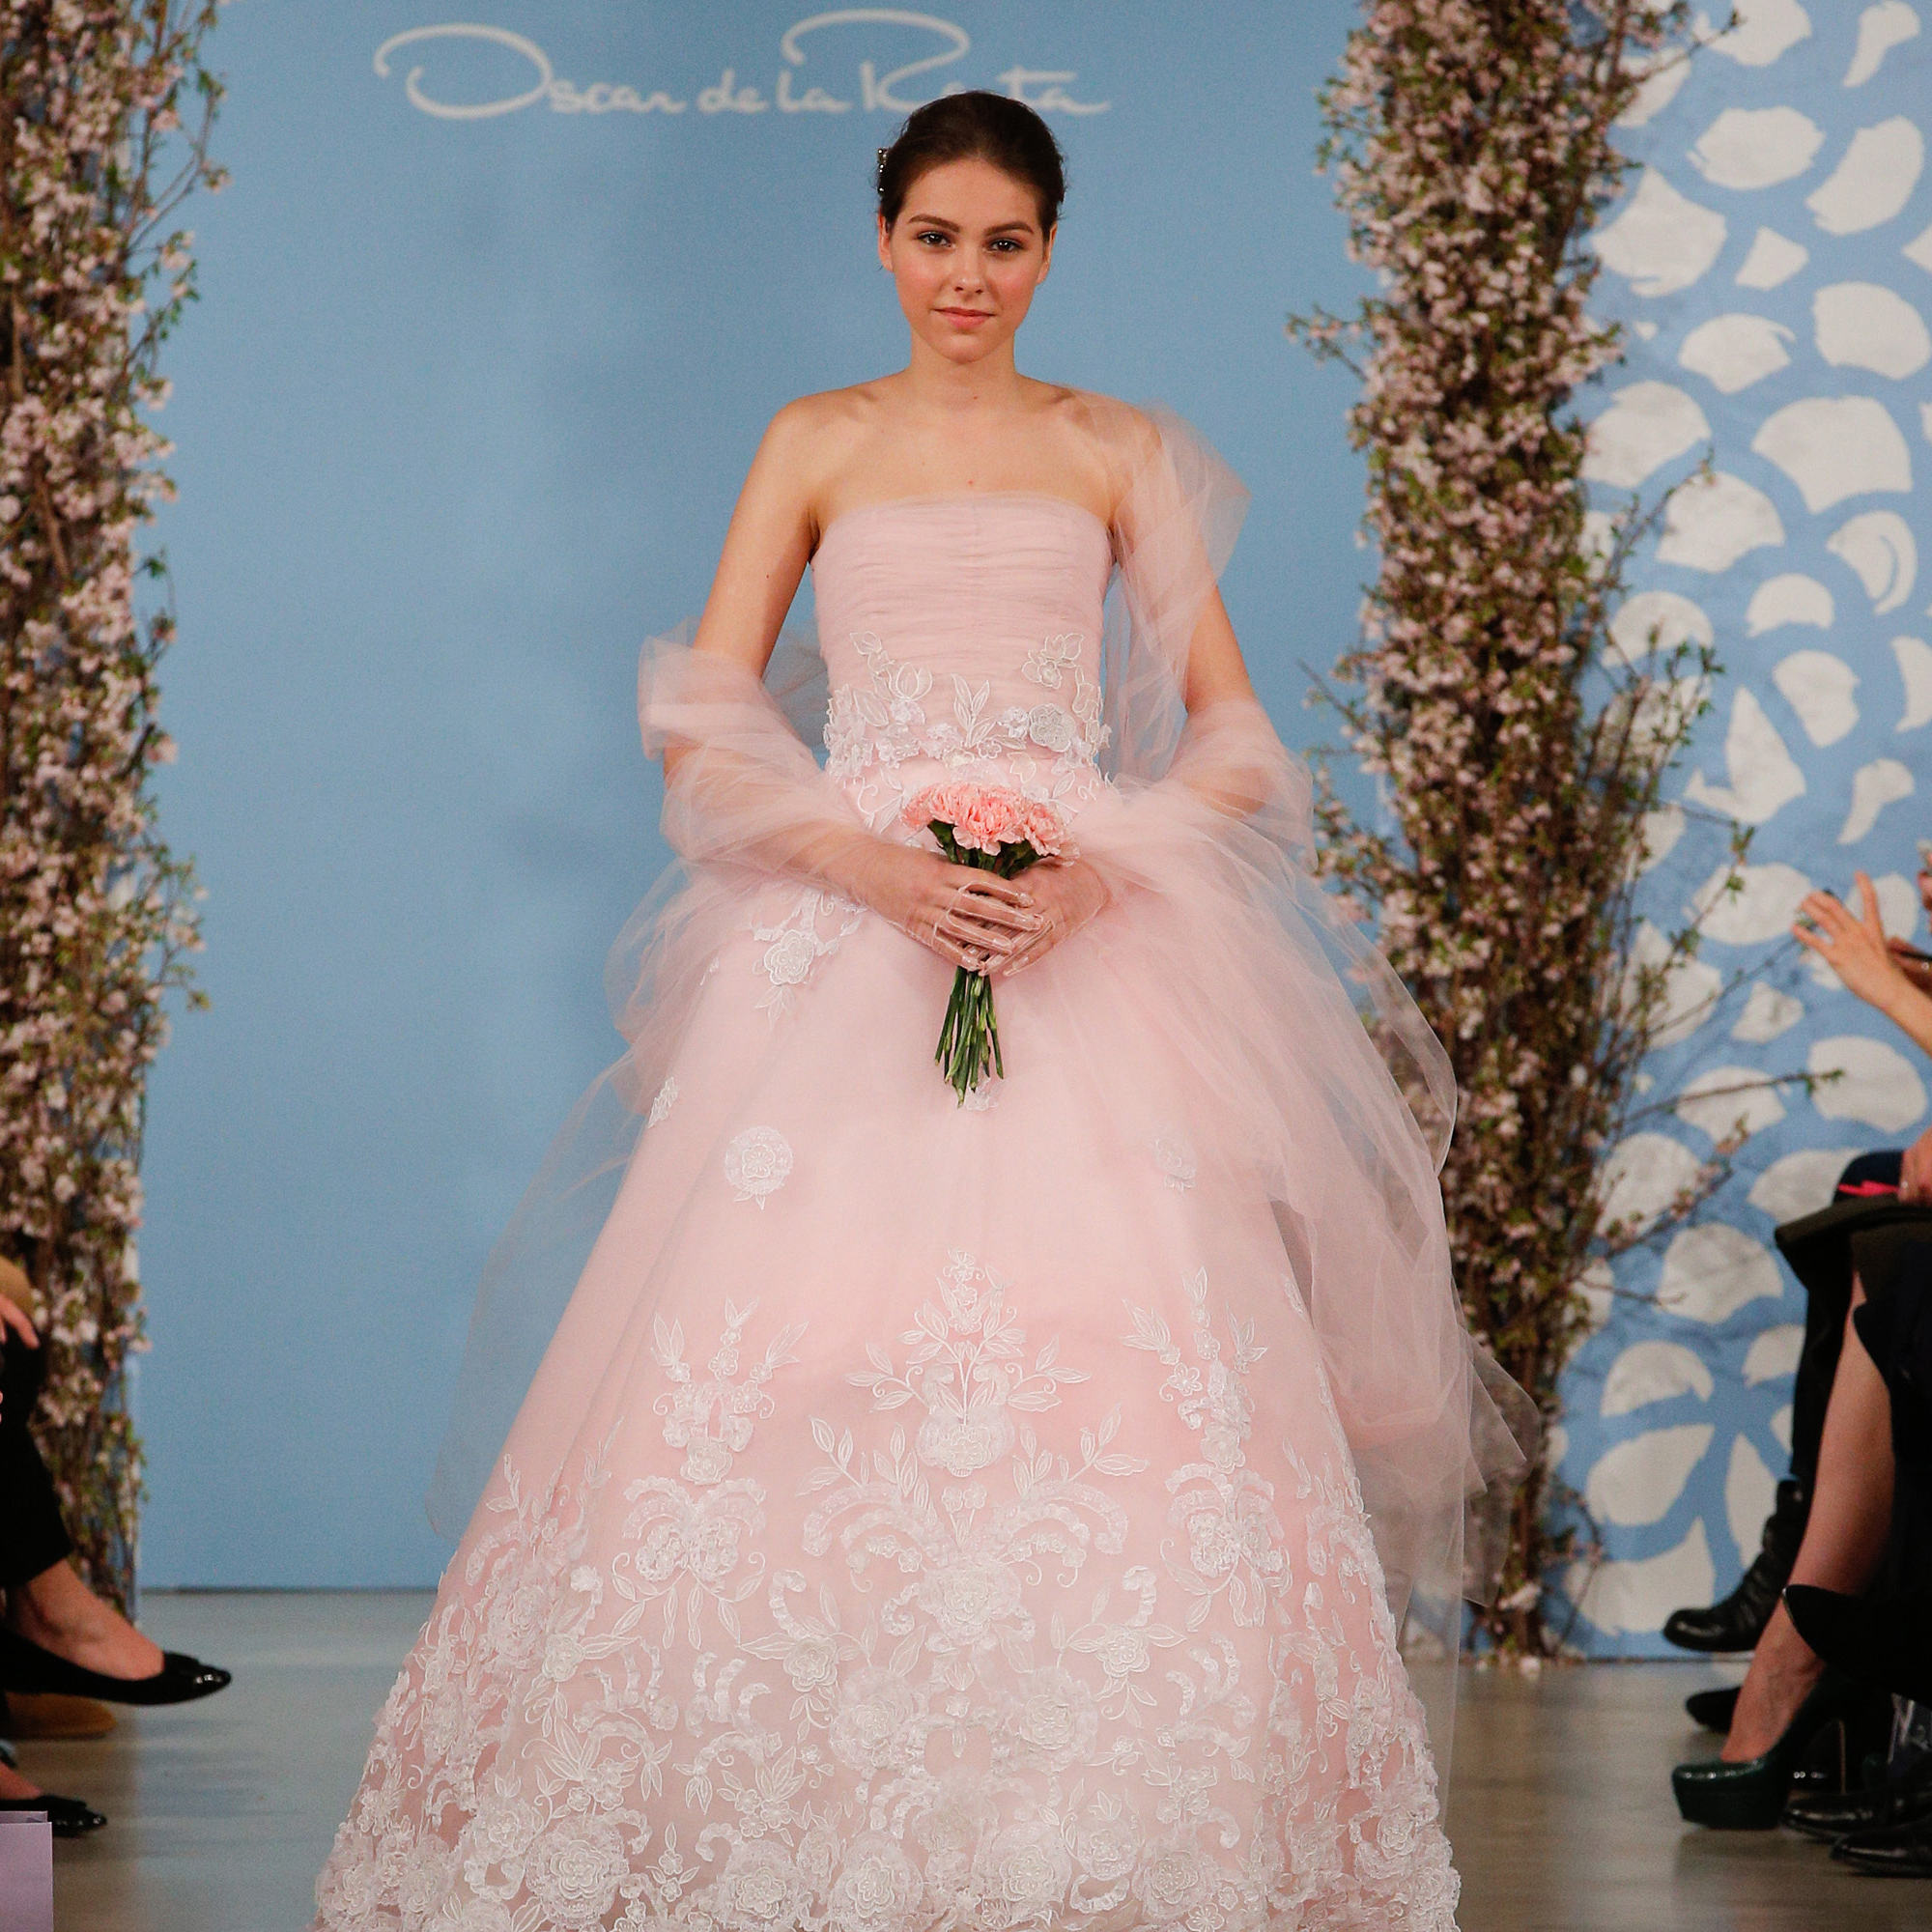 The Prettiest Pink Wedding Dresses: Shop Our Favourites